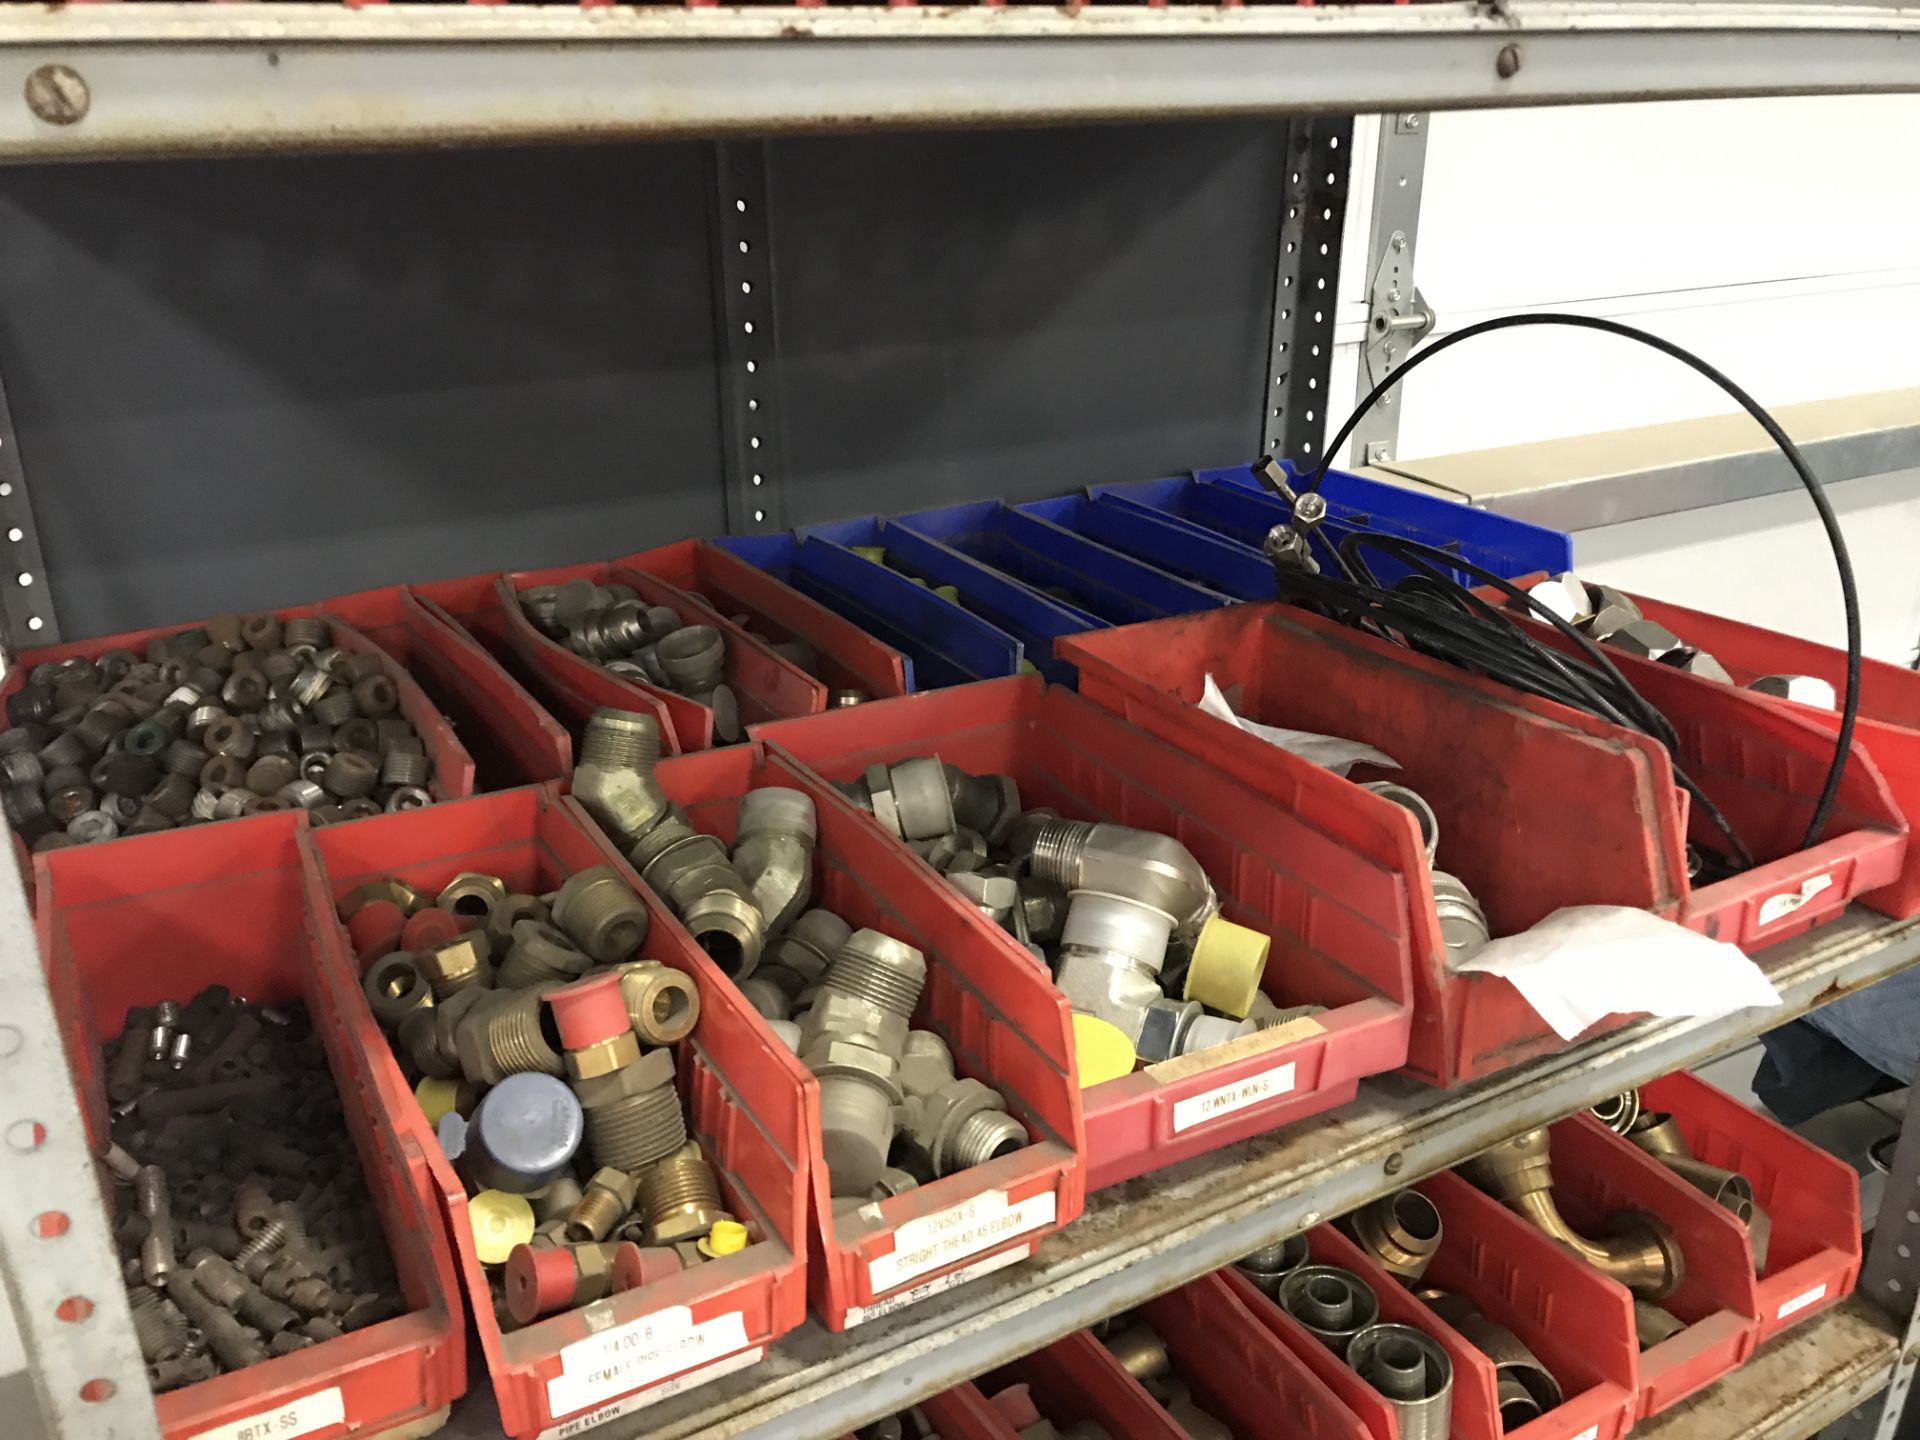 HUNDREDS OF NEW ASSORTED HYDRAULIC FITTINGS ON STEEL SHELF. - Image 3 of 11